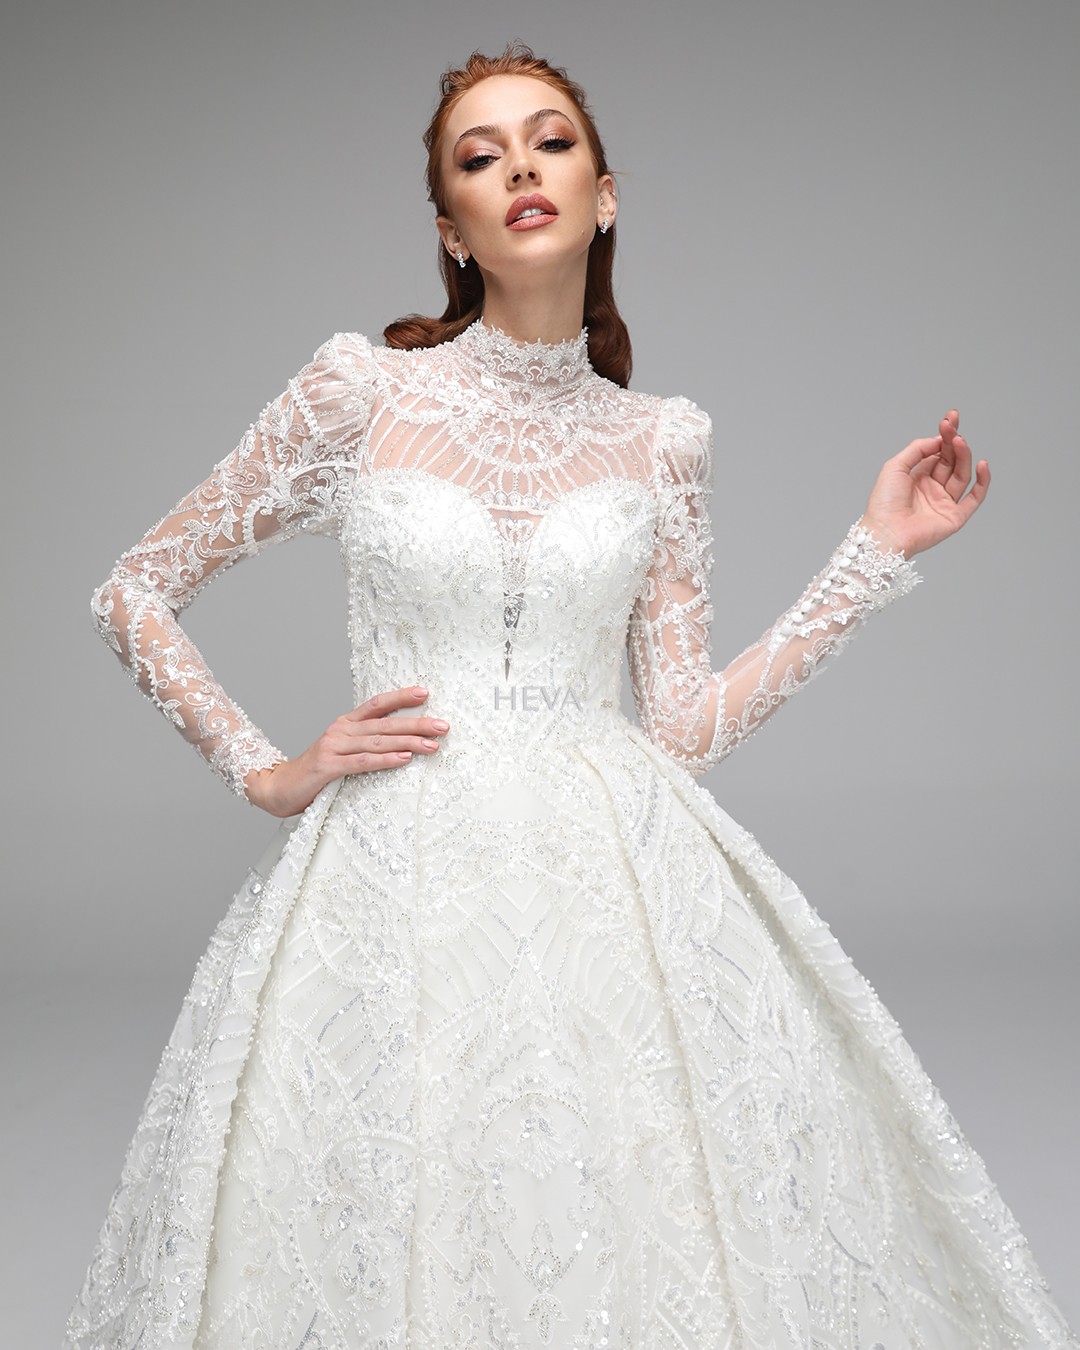 HV22001 - Long-Sleeved Wedding Gown with Pleated Skirt, Train, Corset Bodice, and Hand-Embroidered Beadwork